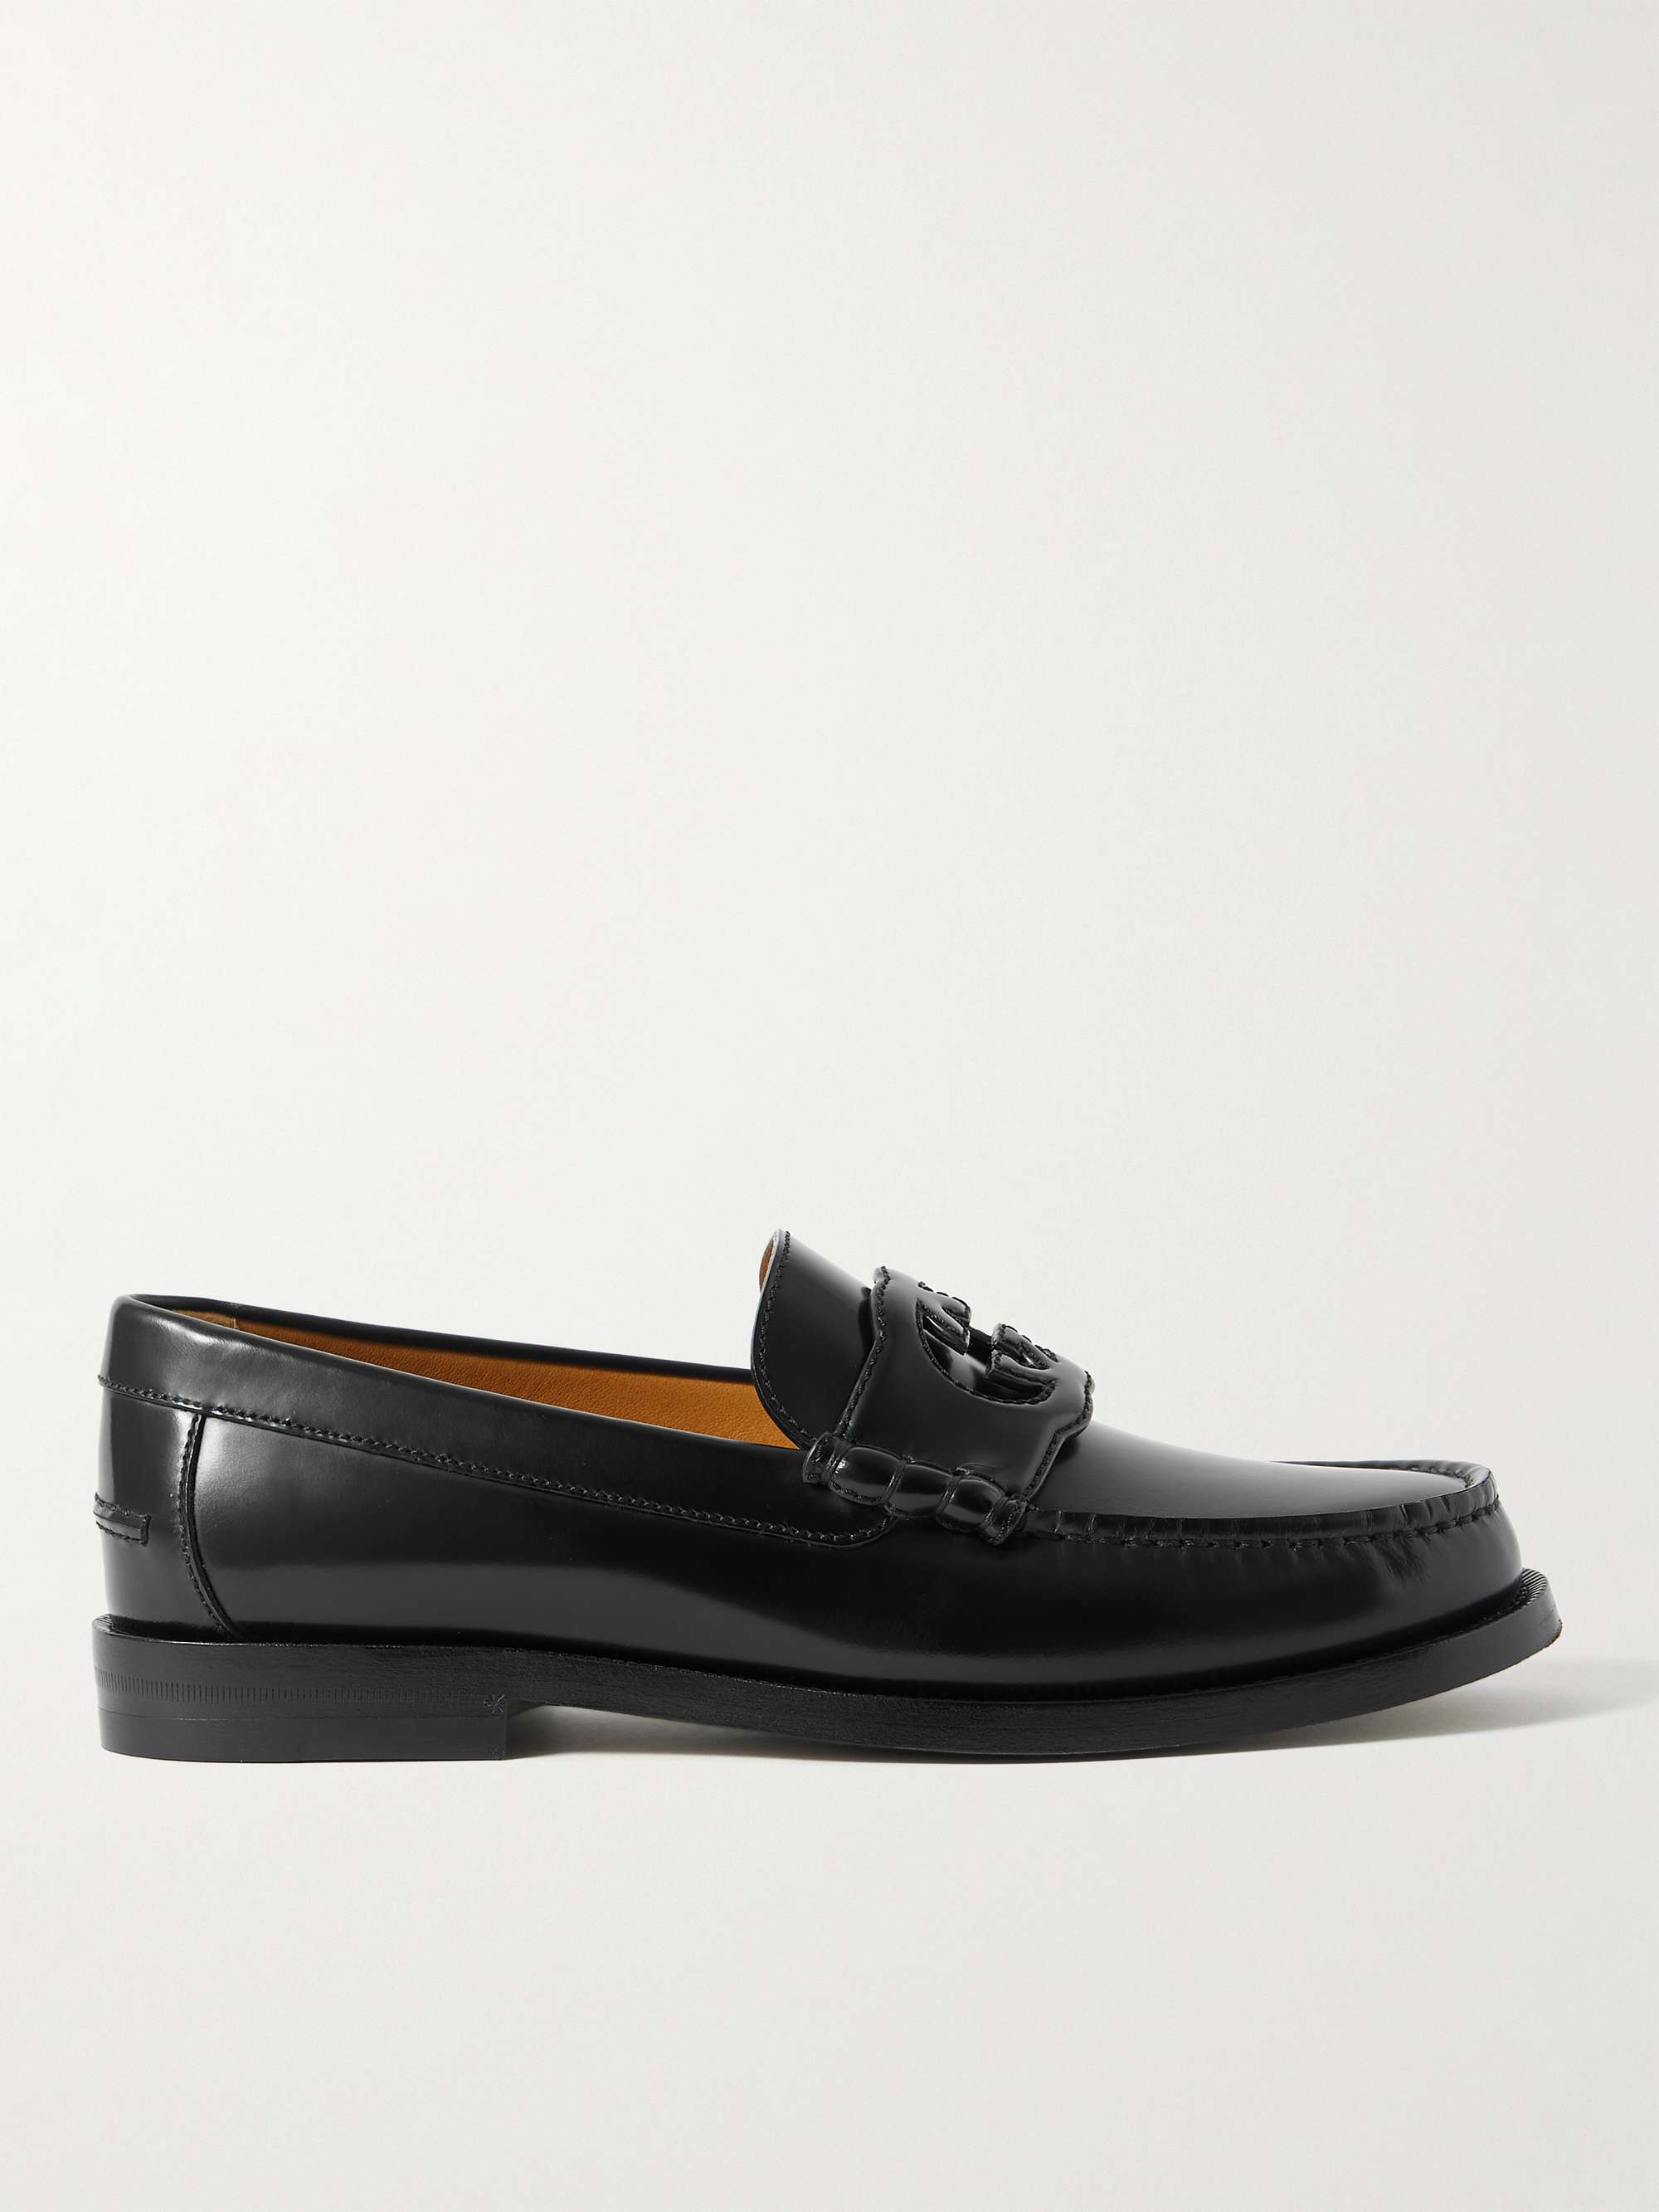 GUCCI Logo-Cutout Leather Penny Loafers for Men | MR PORTER